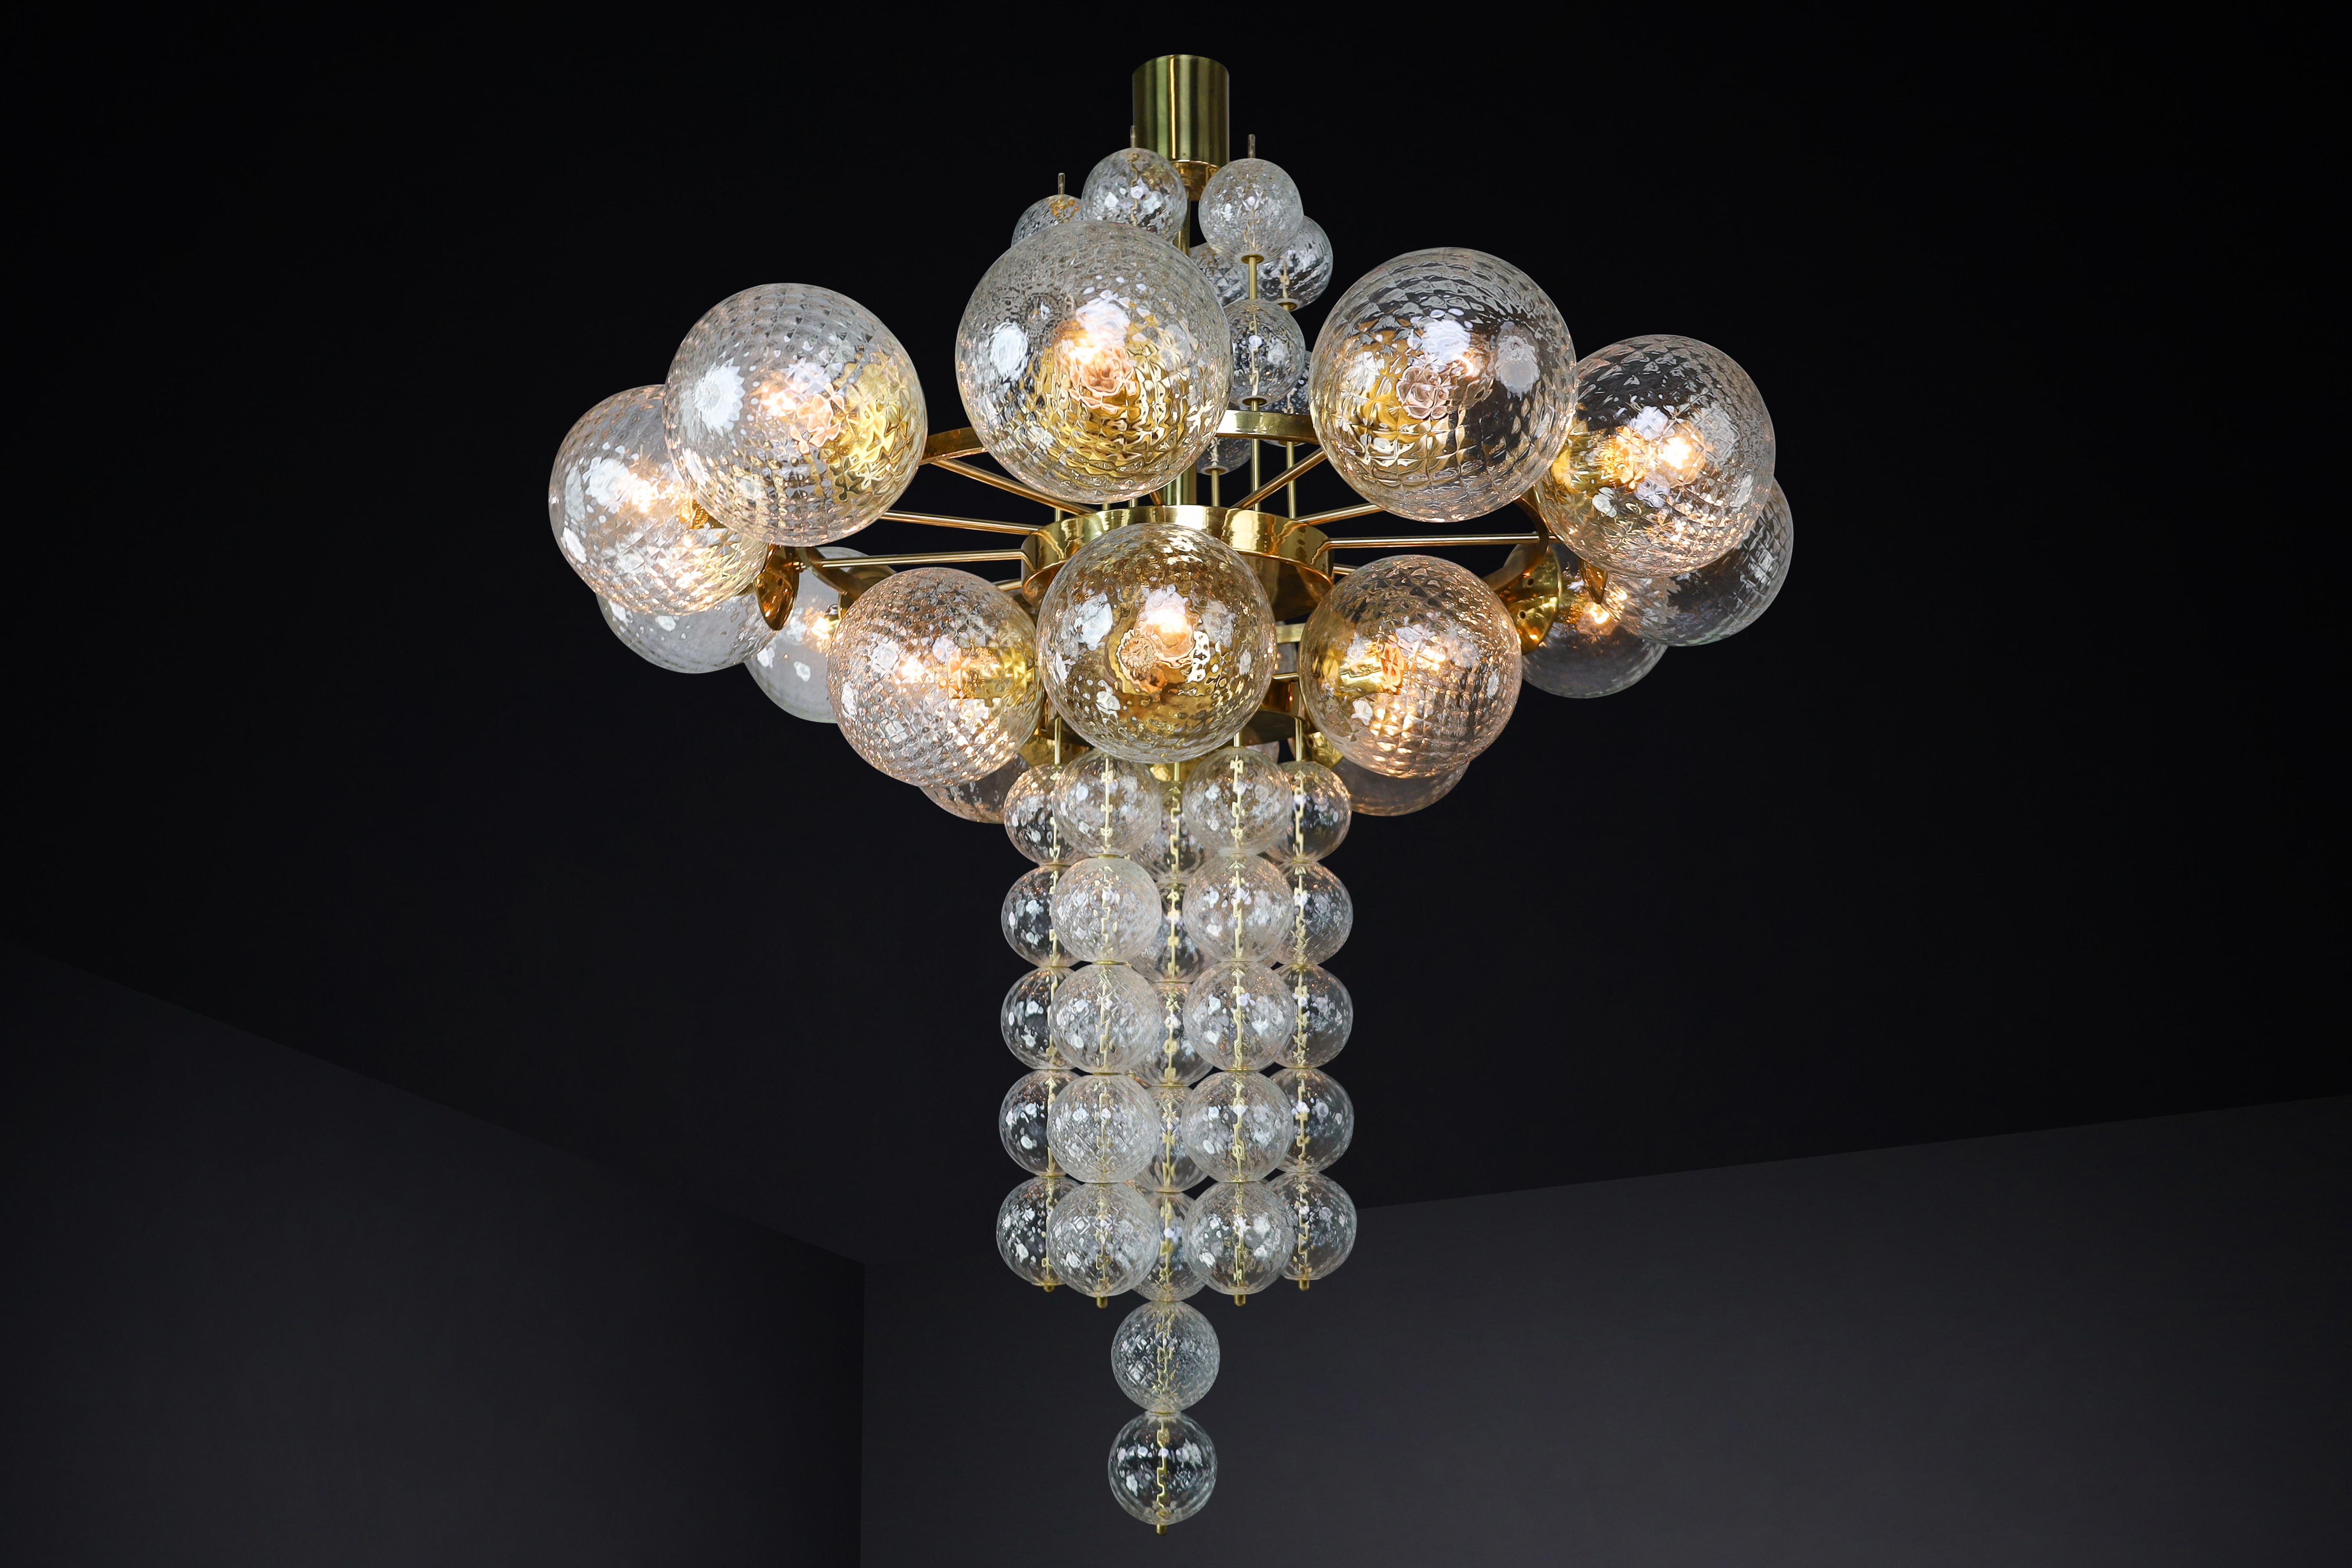 Mid-Century Modern Large Chandelier with brass fixture and hand-blowed glass globes by Preciosa Cz. For Sale